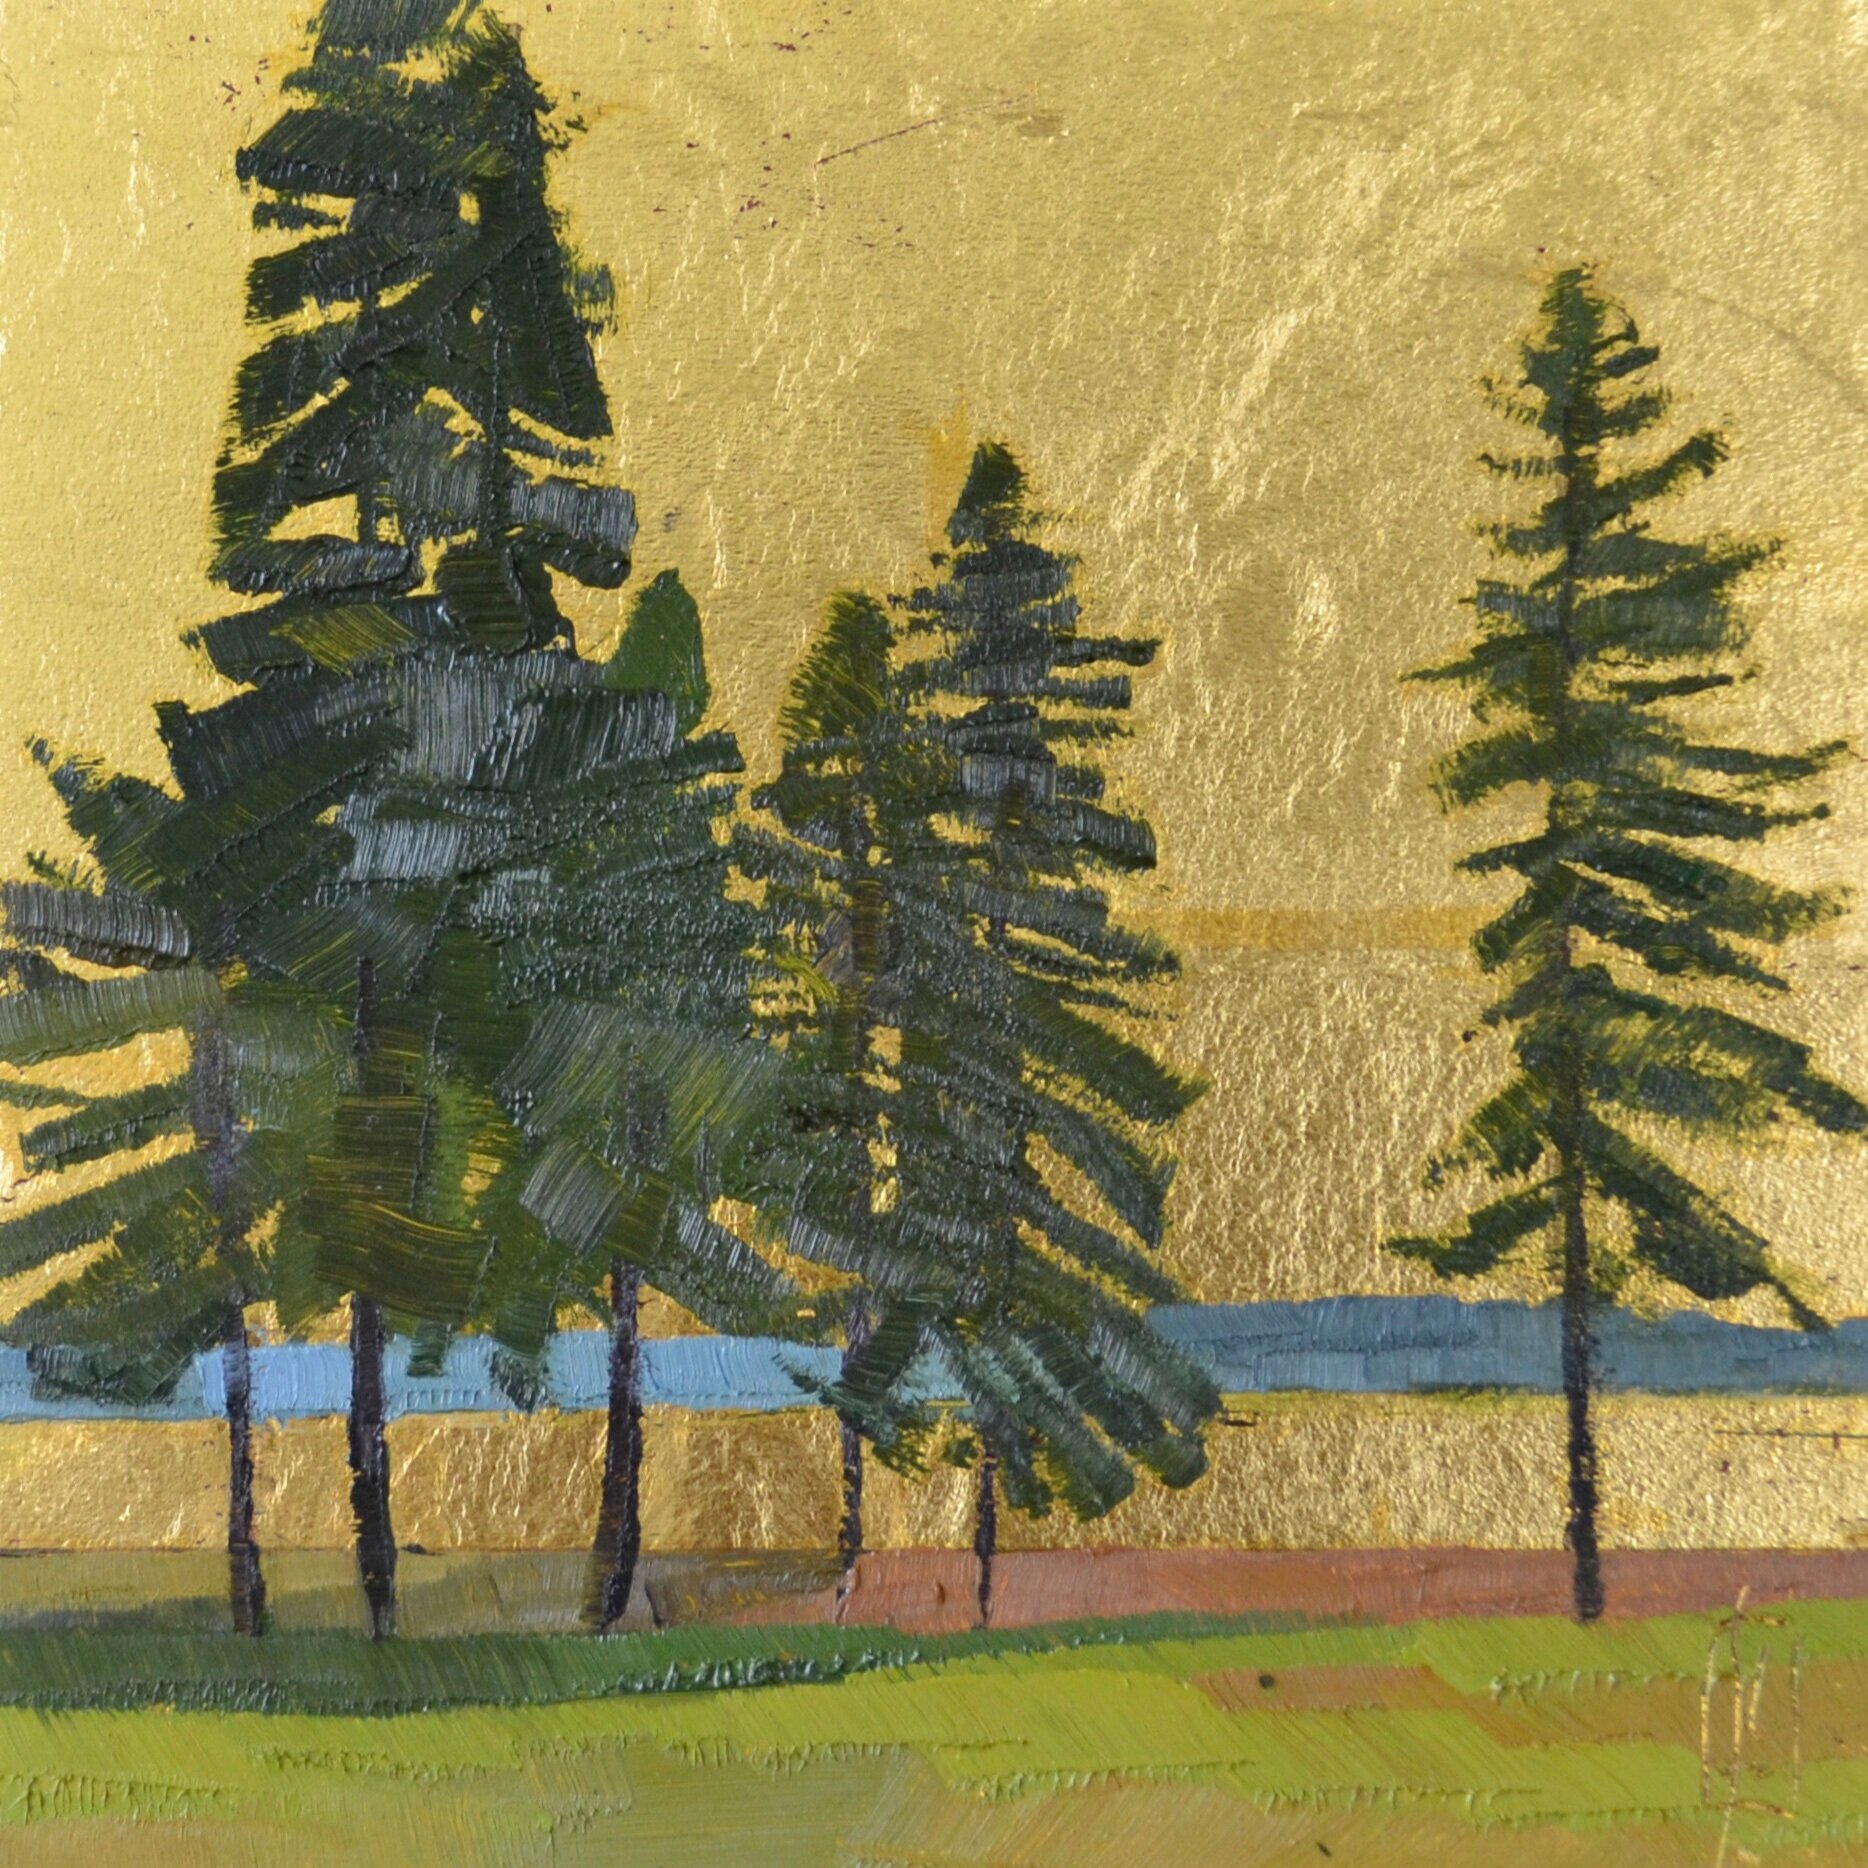   Thompson Island  6 x 6 oil and 24k gold  Islesford Artists Gallery  sold 